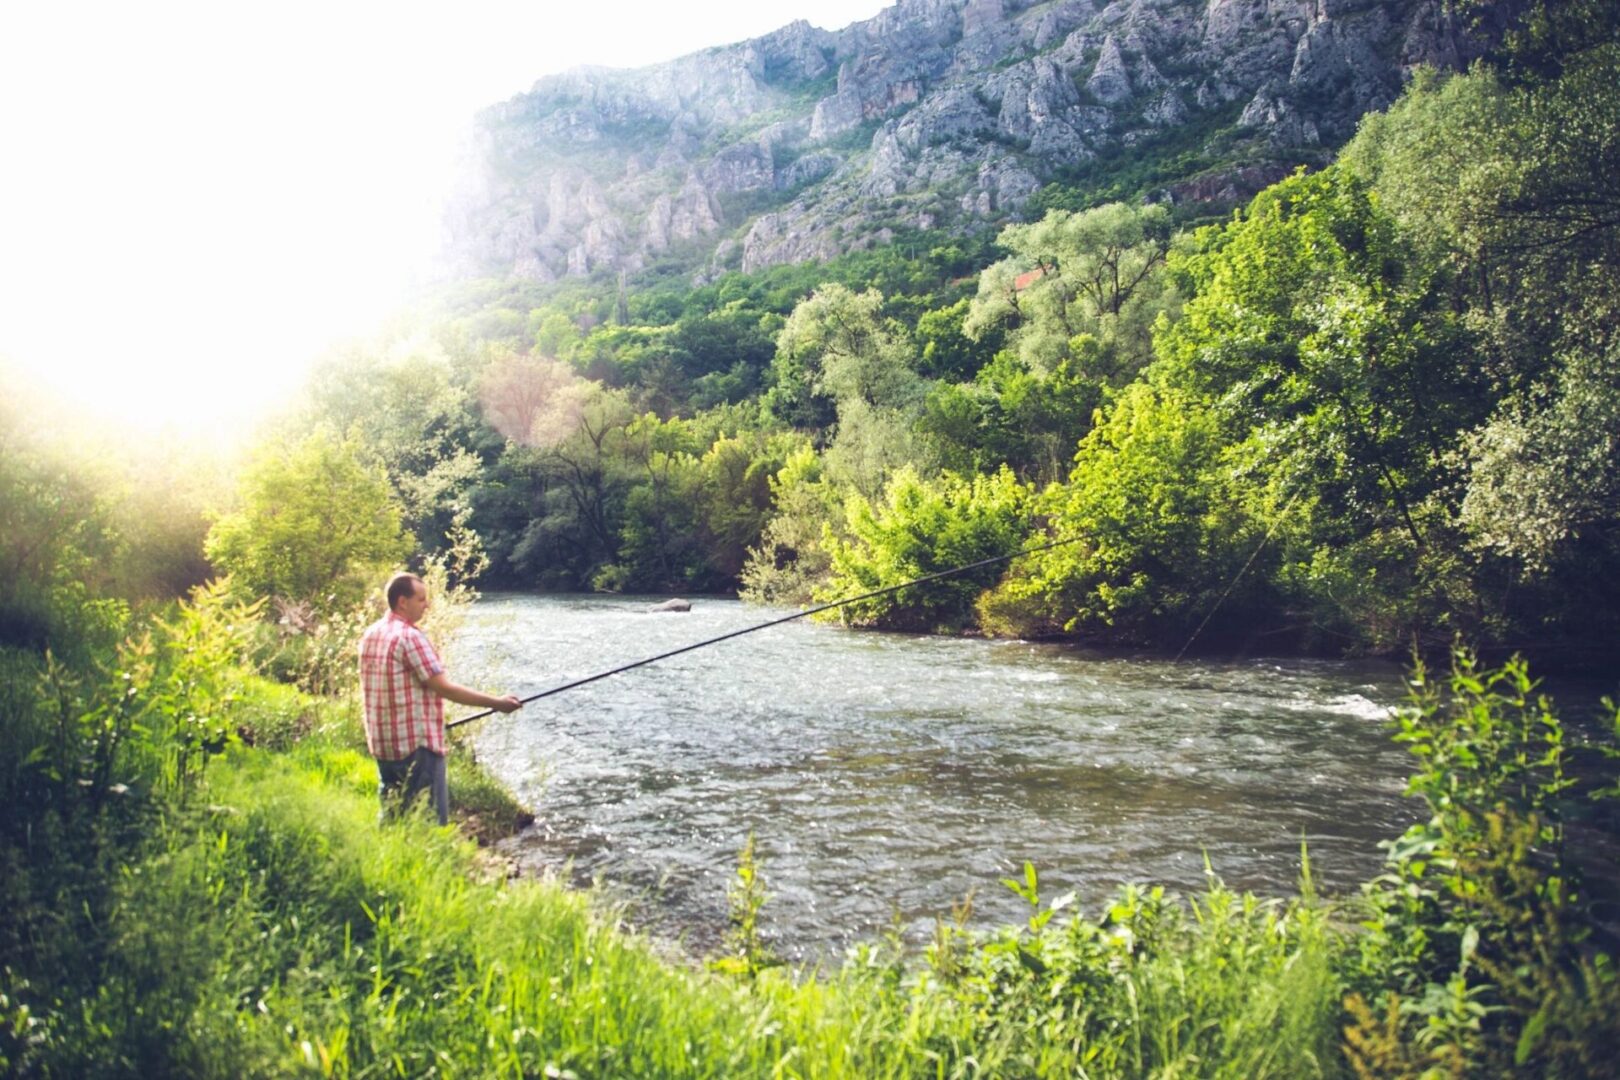 A man fishing in the middle of a river.